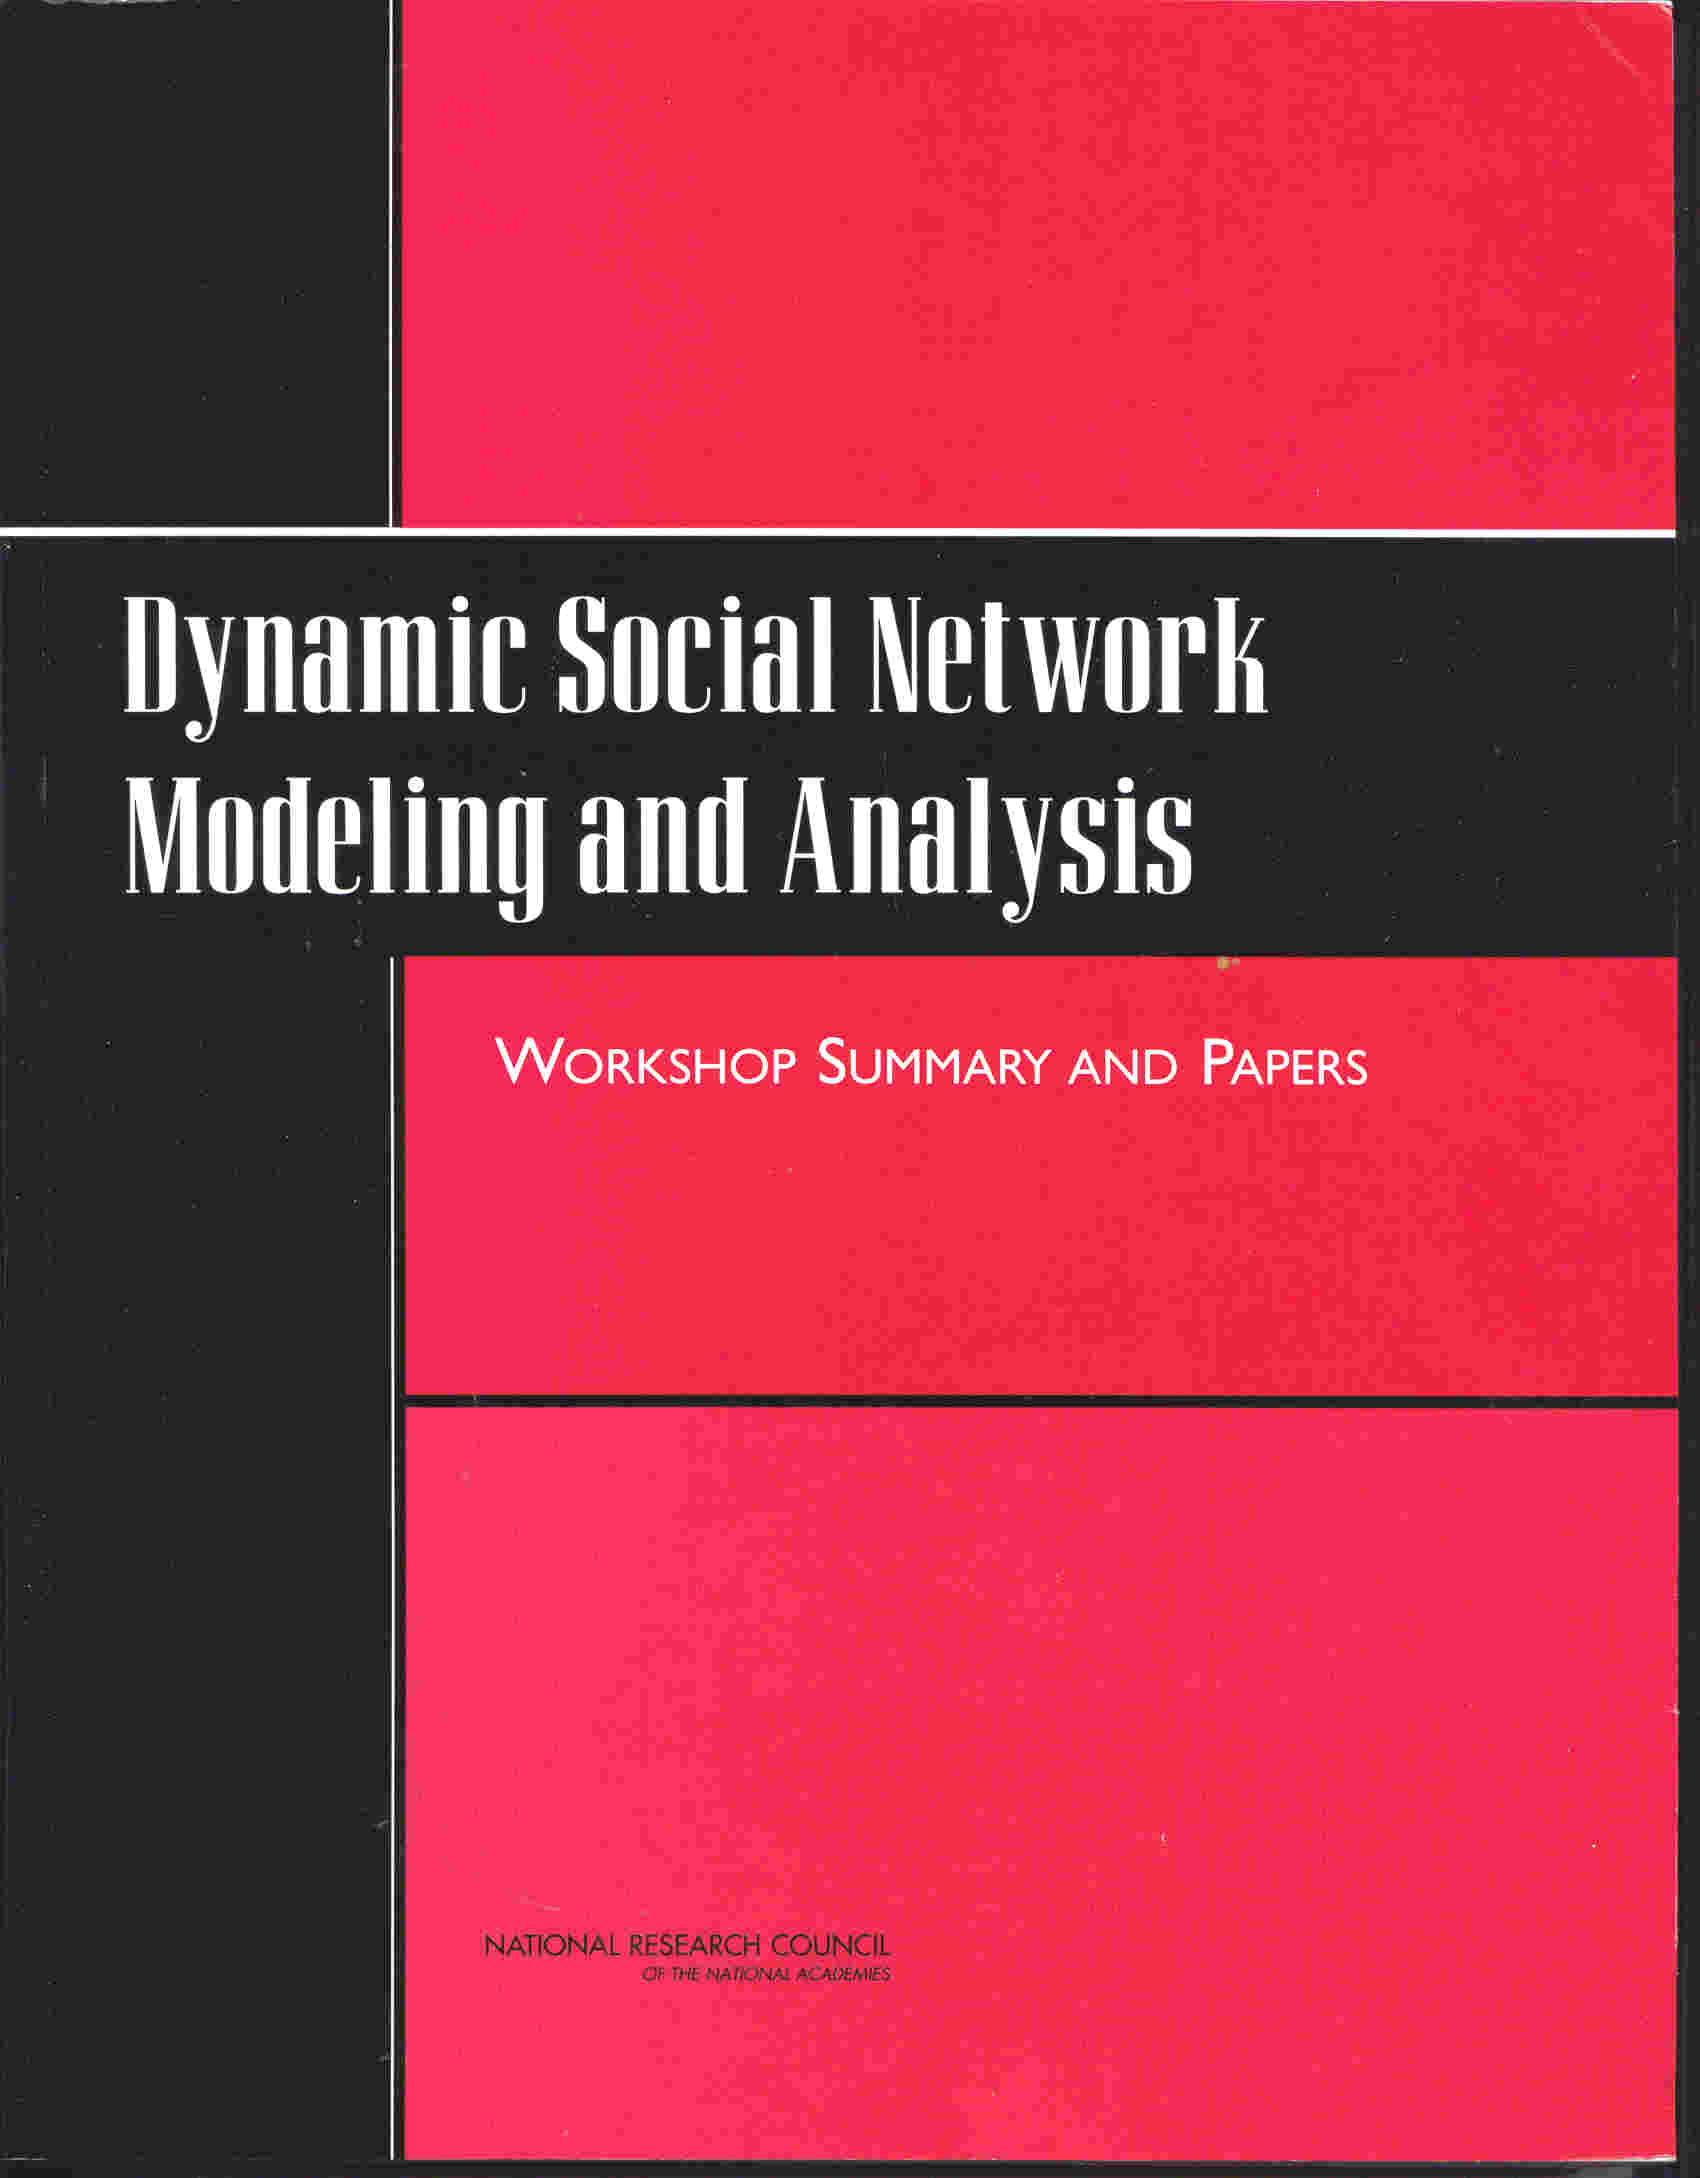 research papers on social networking